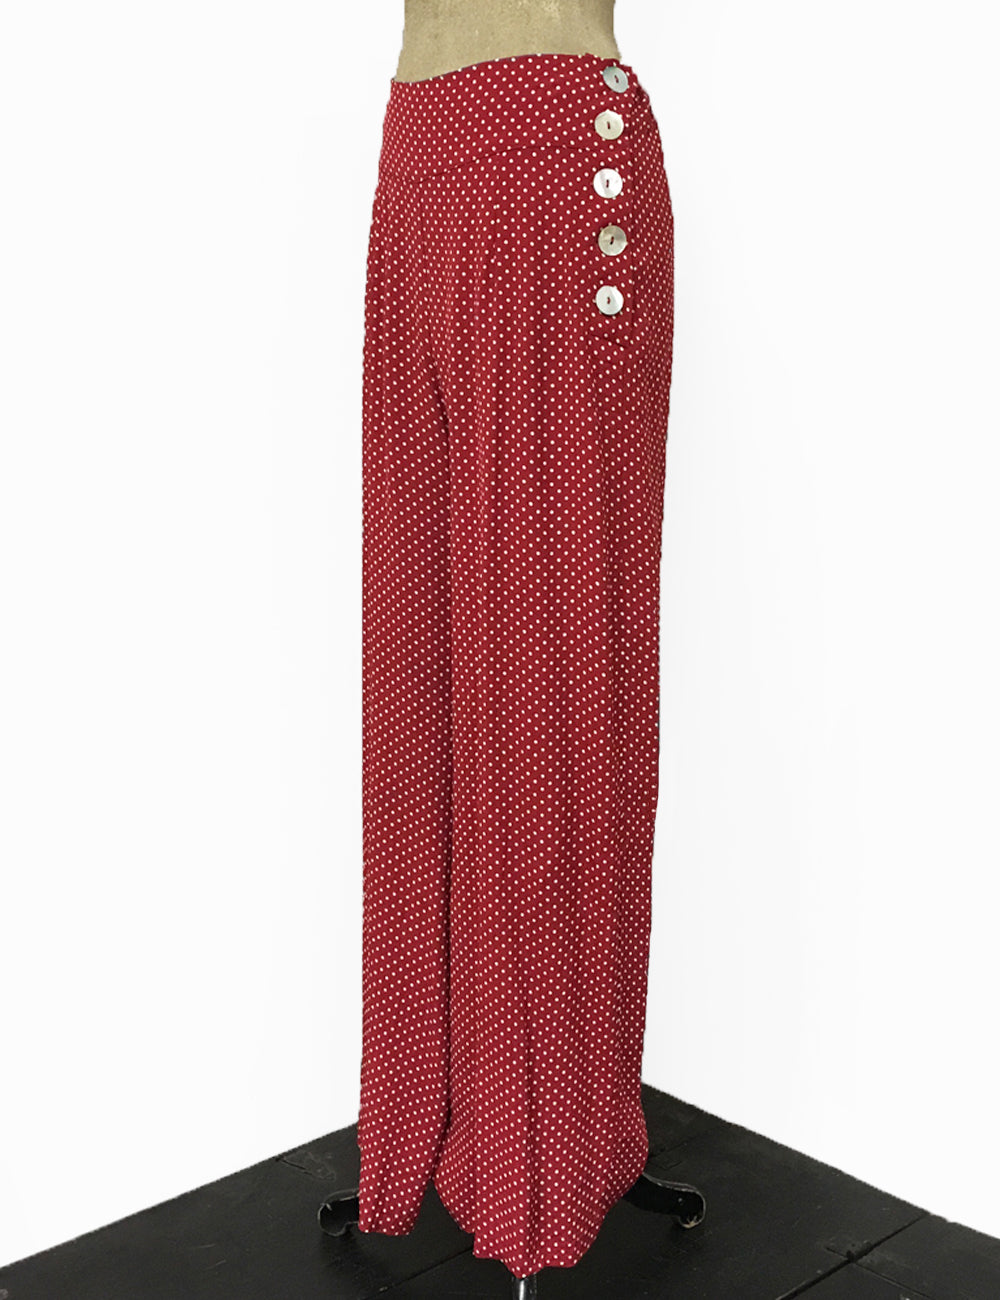 Polka Dot Wide Leg Pants - A Day In The Lalz